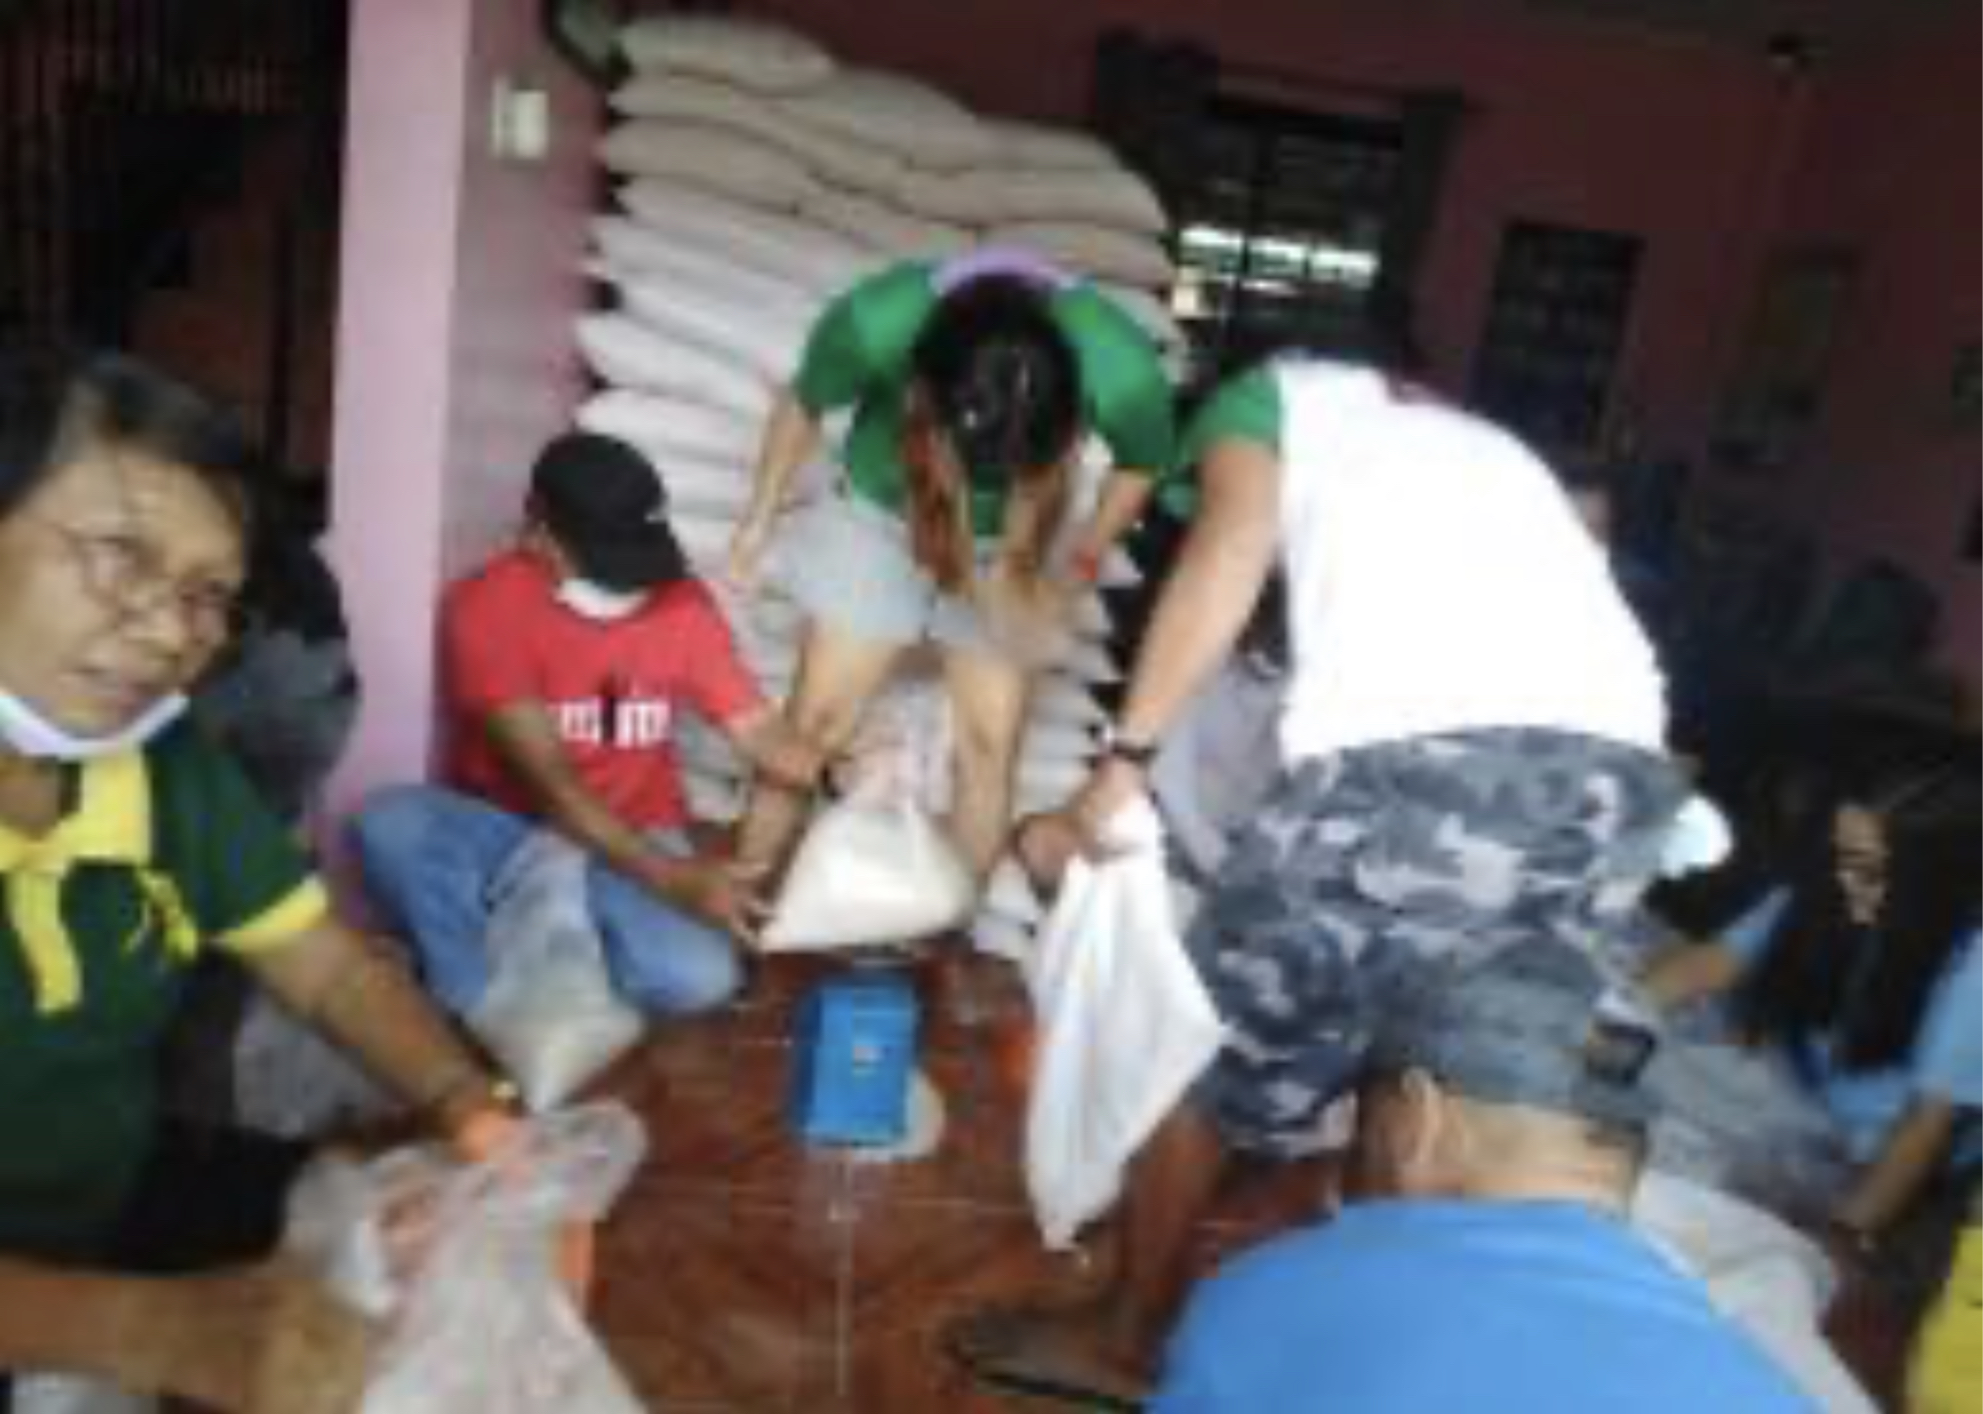 Rice Donation in Luzon and Cebu by Science Park of the Philippines, Inc., Pueblo de Oro Development Corporation, Hermosa Ecozone Development Corporation and Cebu Light Industrial Park